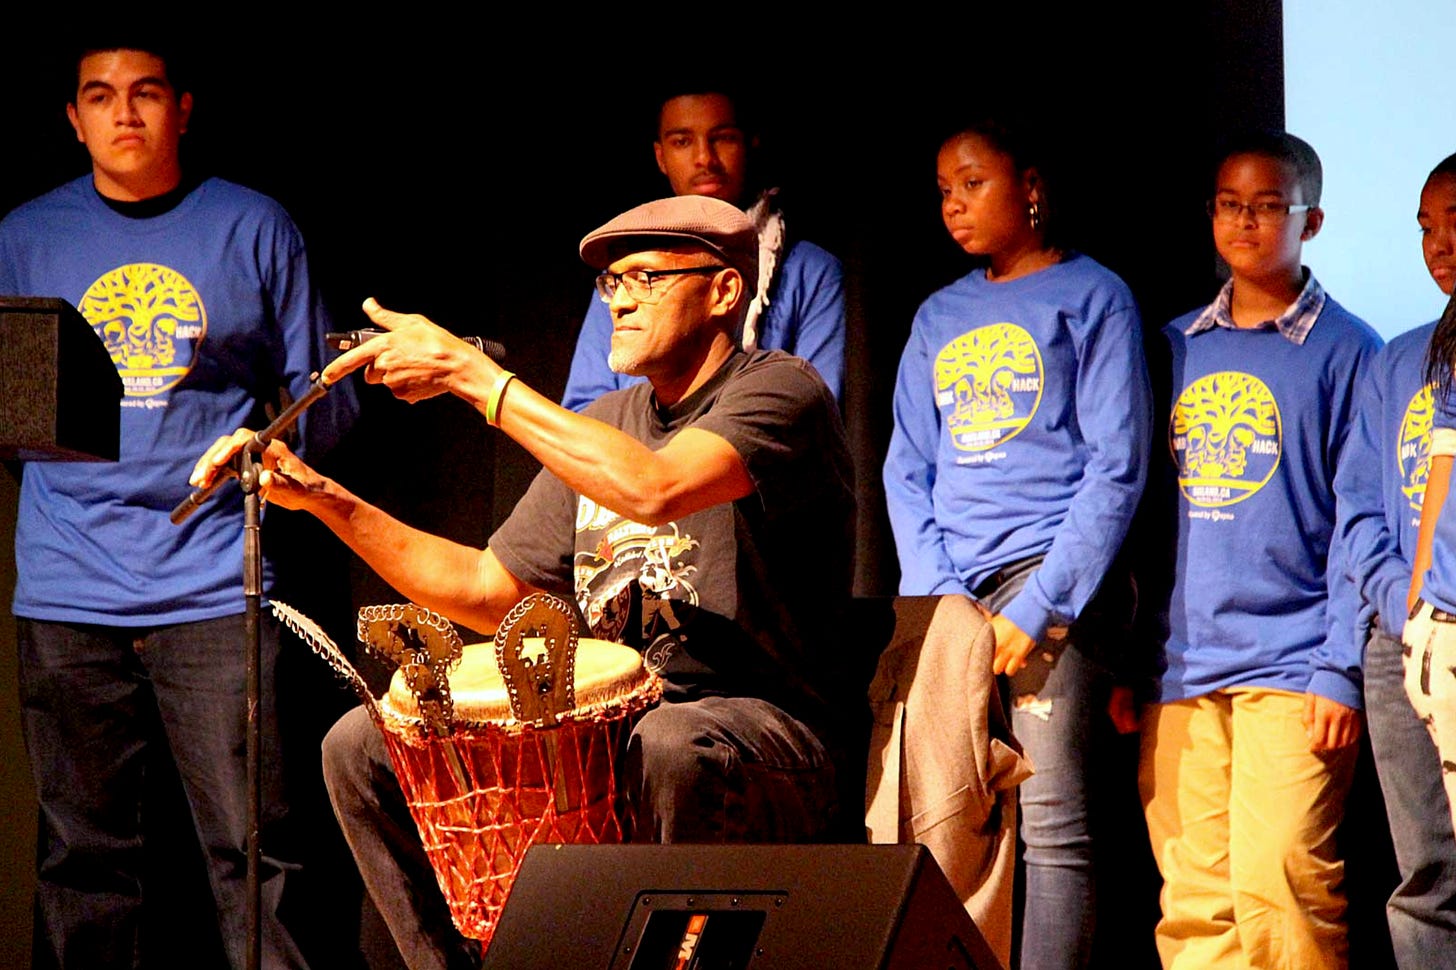 Greg seated with an African drum, children and youth stand behind him in matching blue shirts with oaktree design